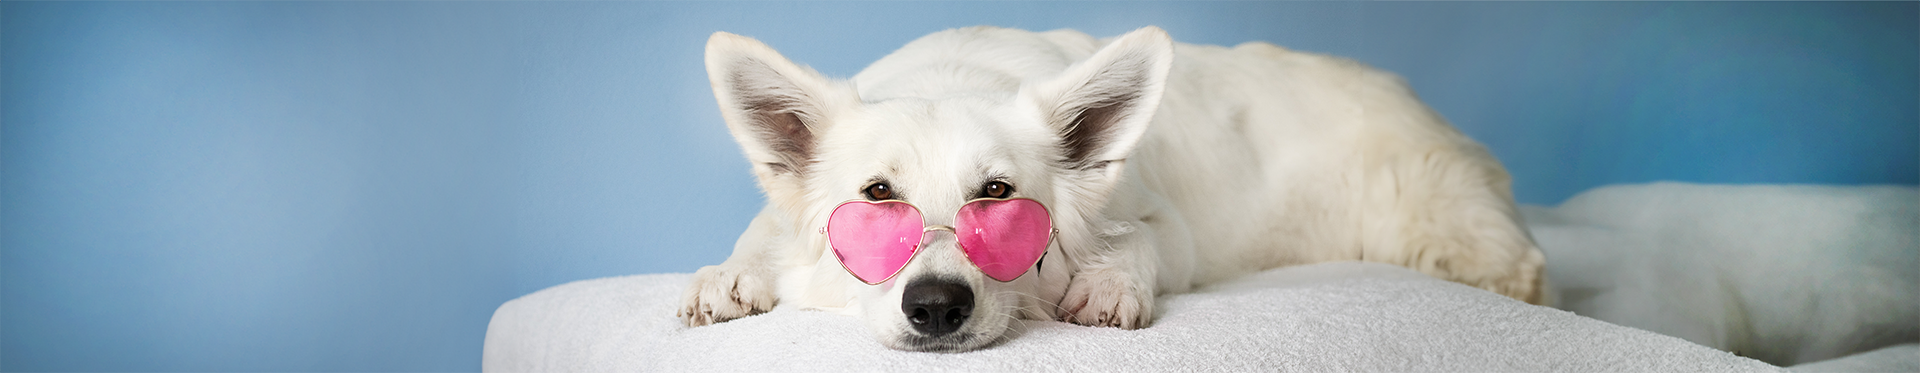 White dog wearing pink glasses while laying down